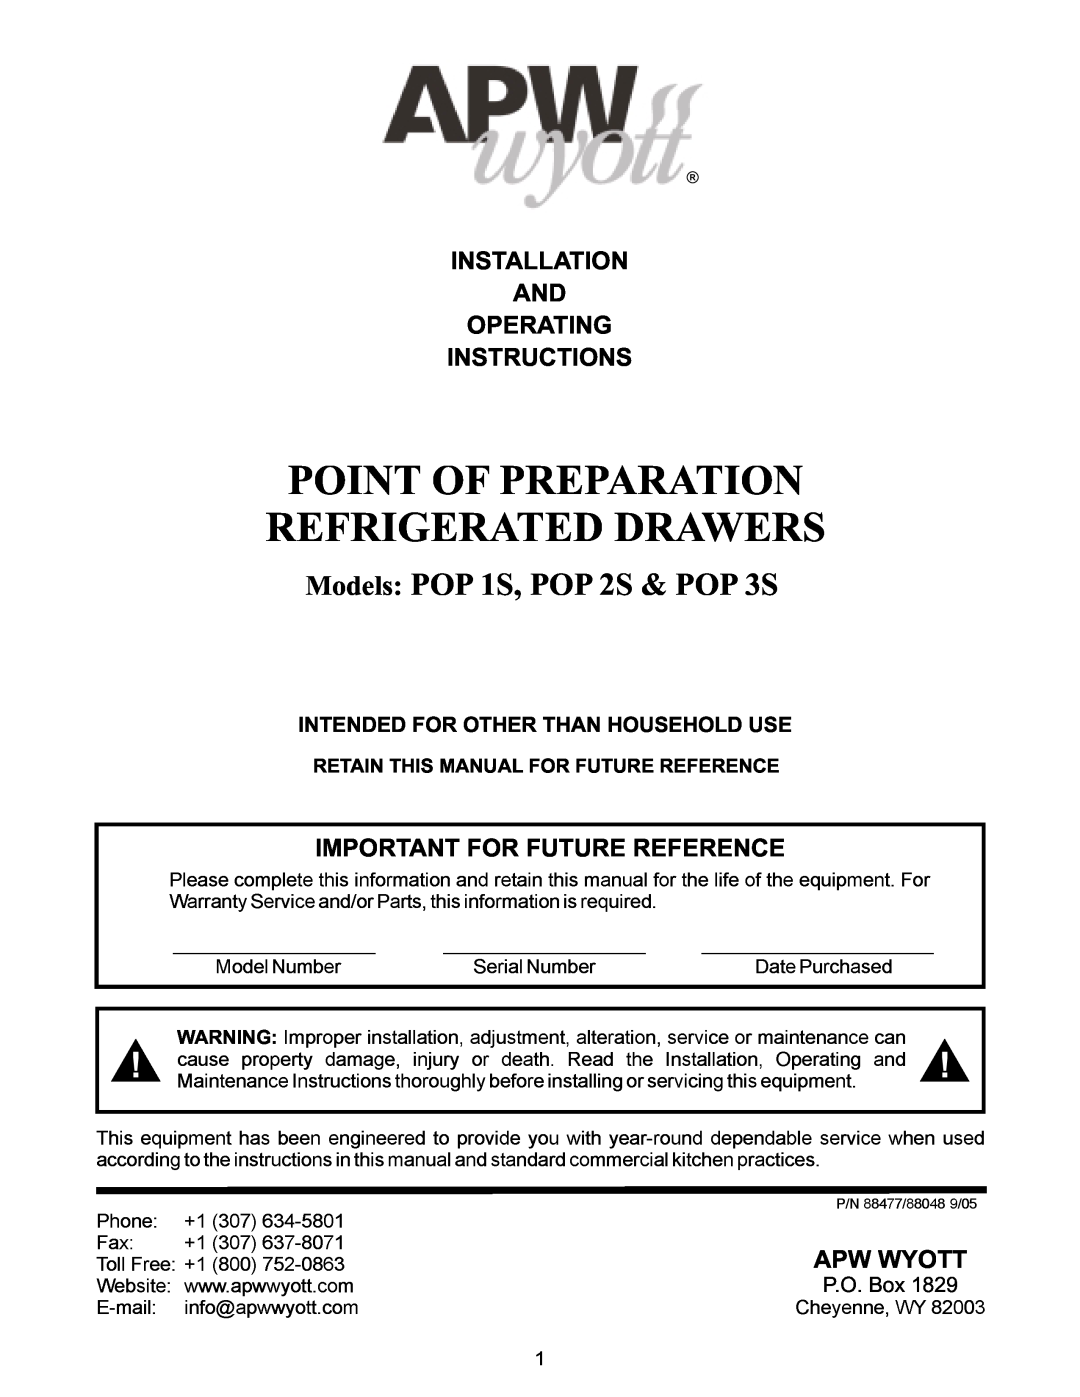 APW Wyott manual Point Of Preparation Refrigerated Drawers, 30763, +180752-58063, Models POP 1S, POP 2S & POP 3S, 8071 